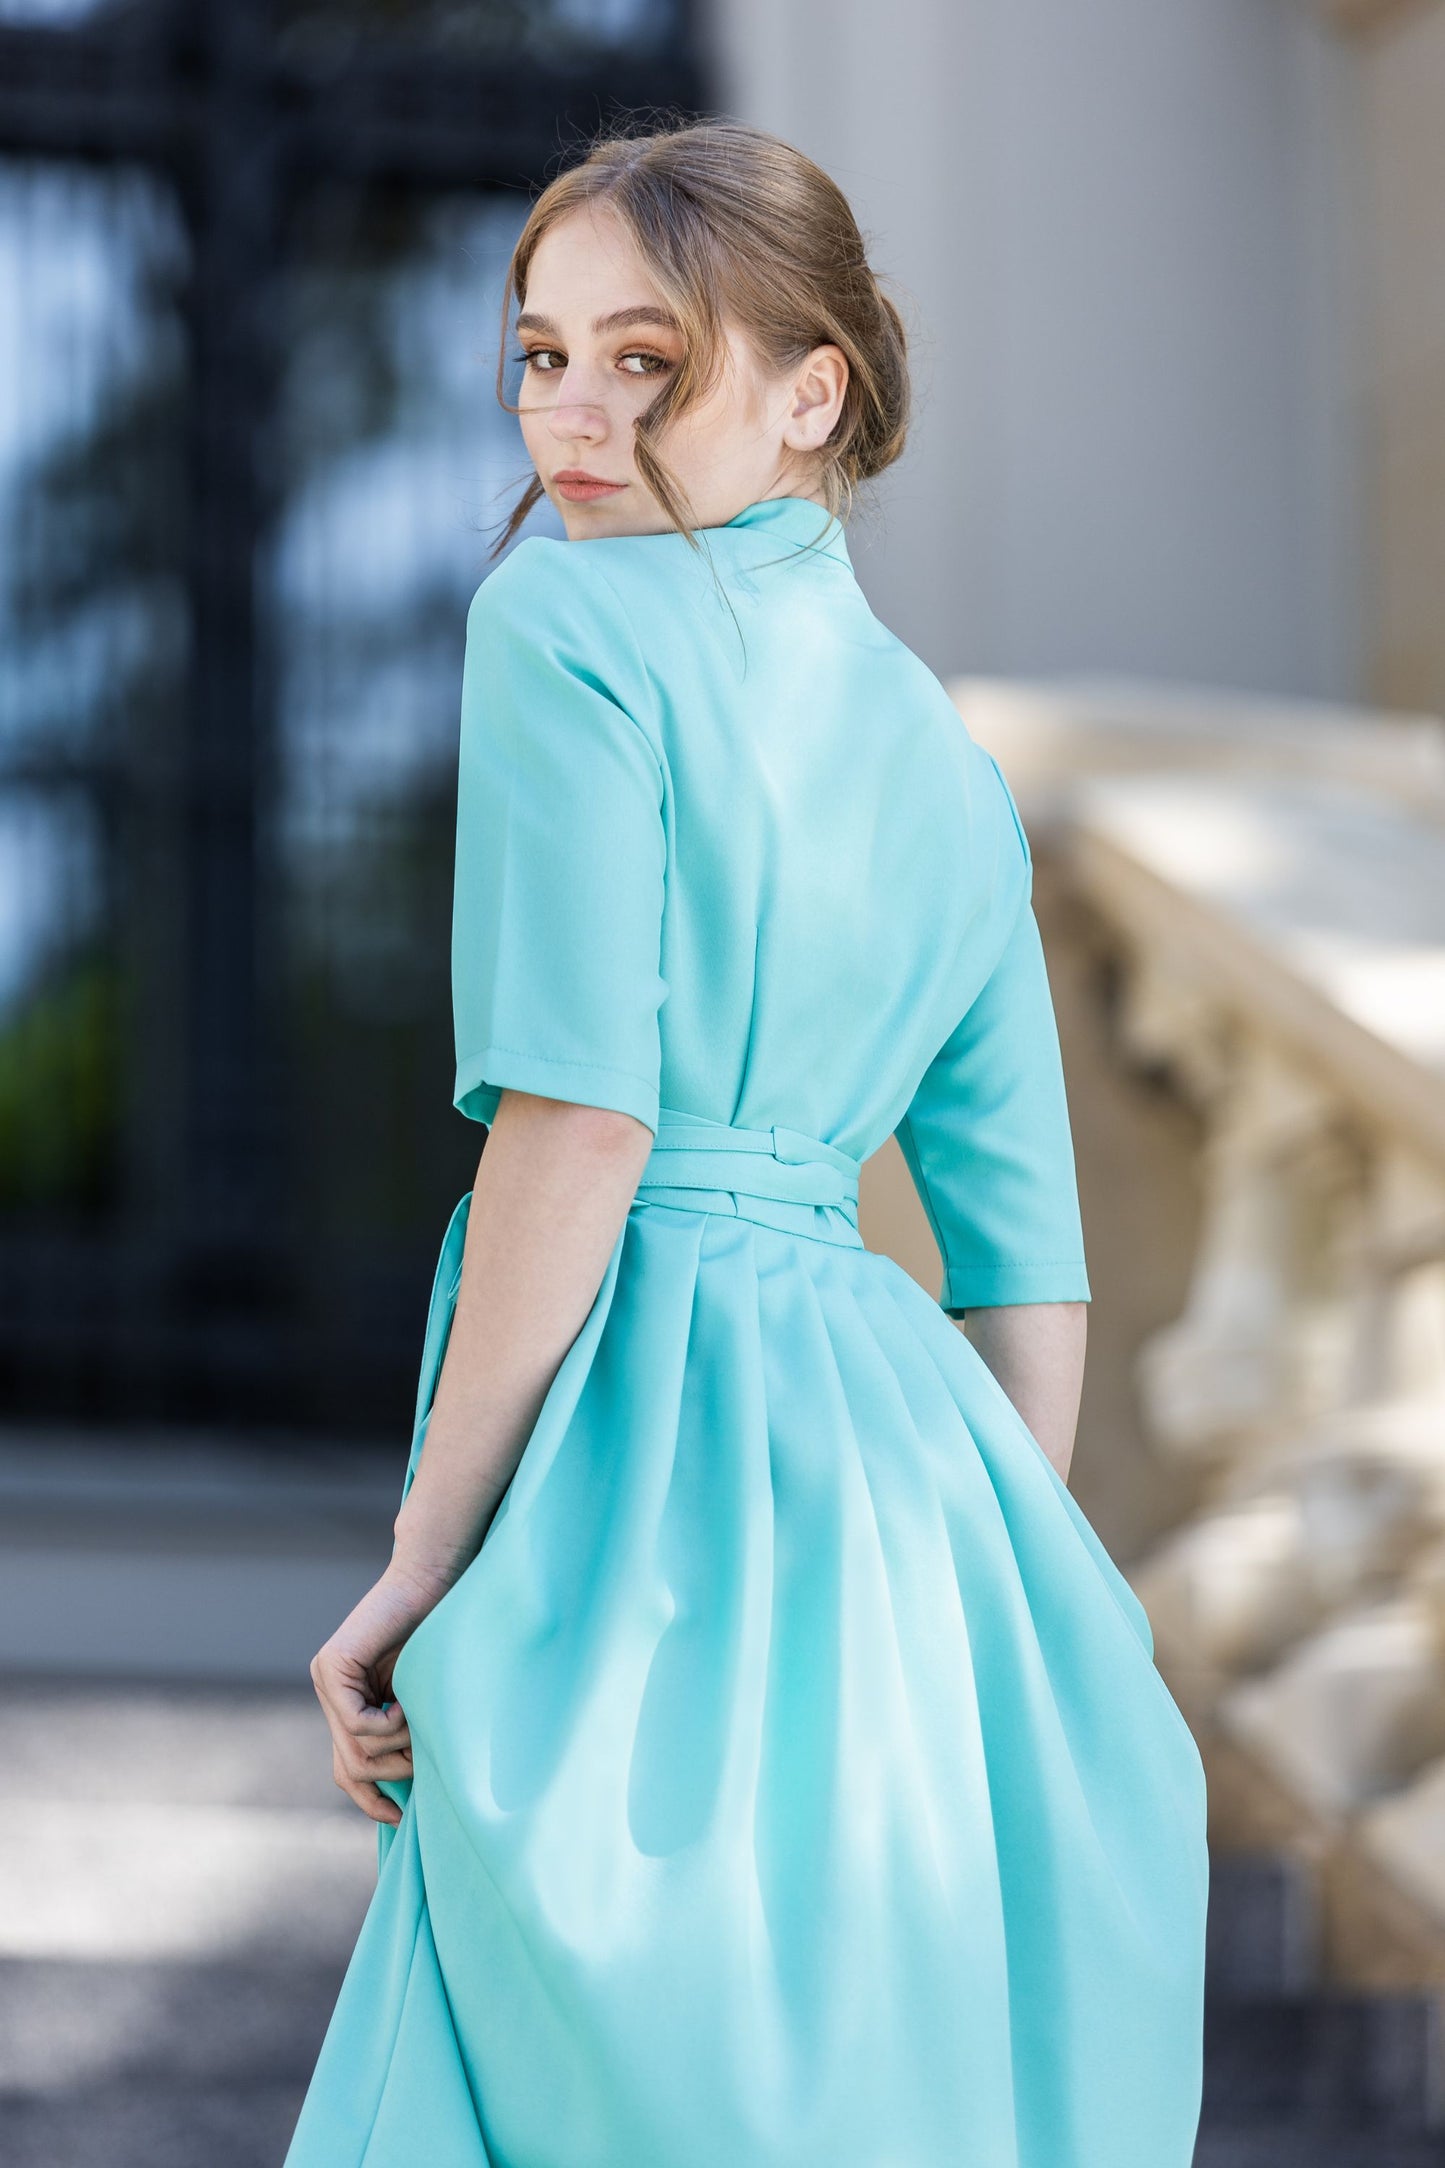 Turquoise/ Sea colour classic maxi dress with pleats and separated belt